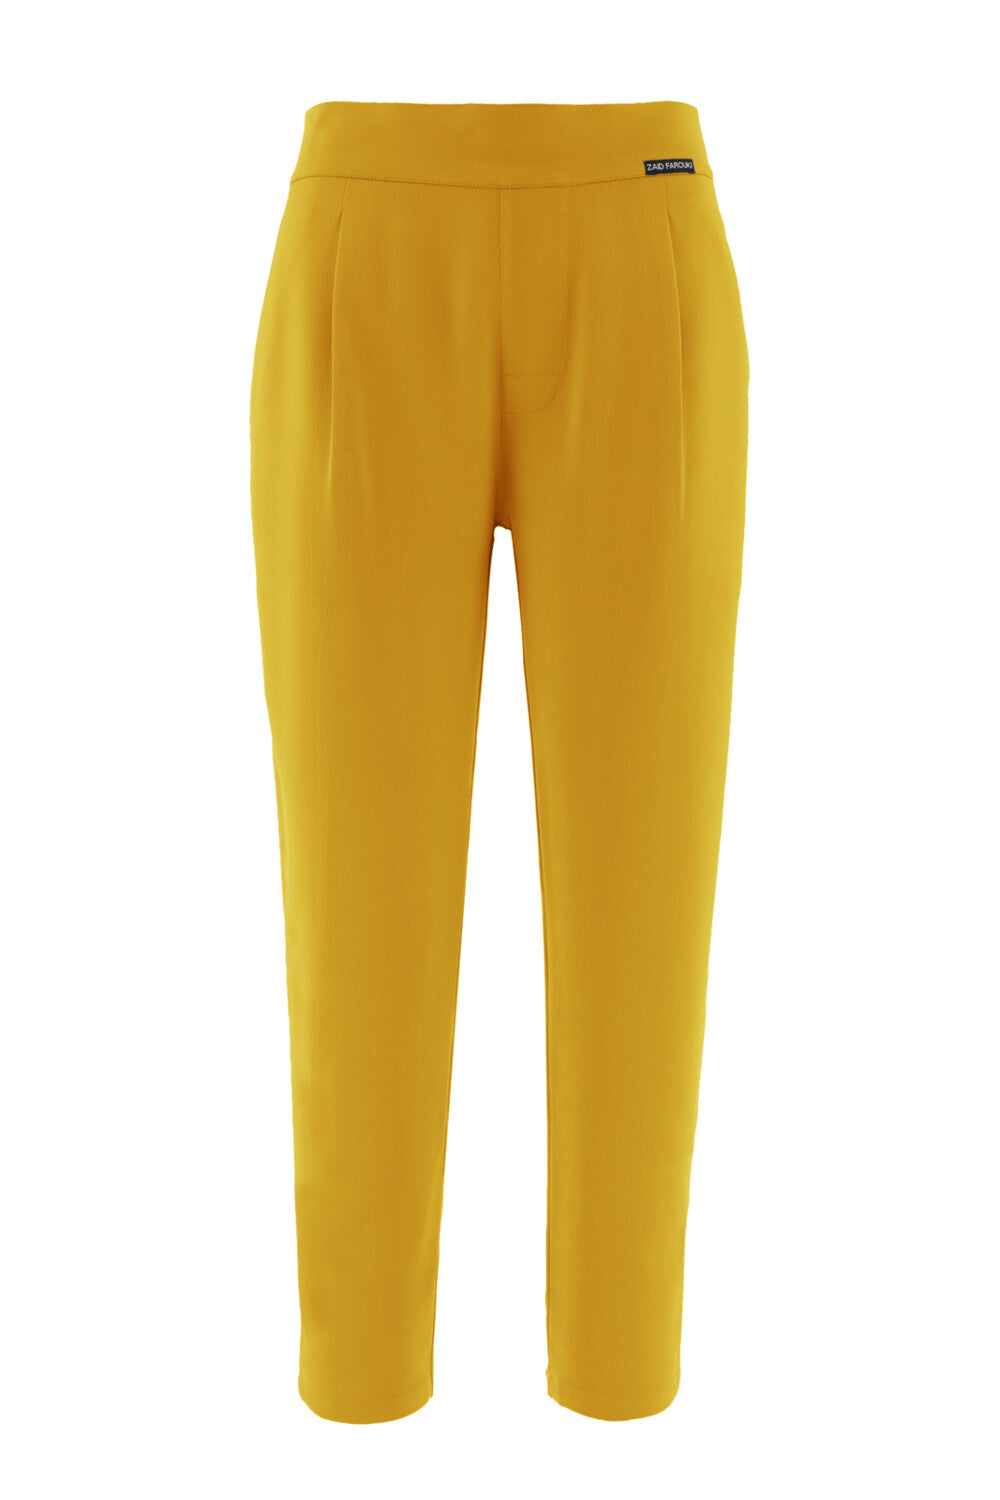 Amber Yellow Tailored Trousers